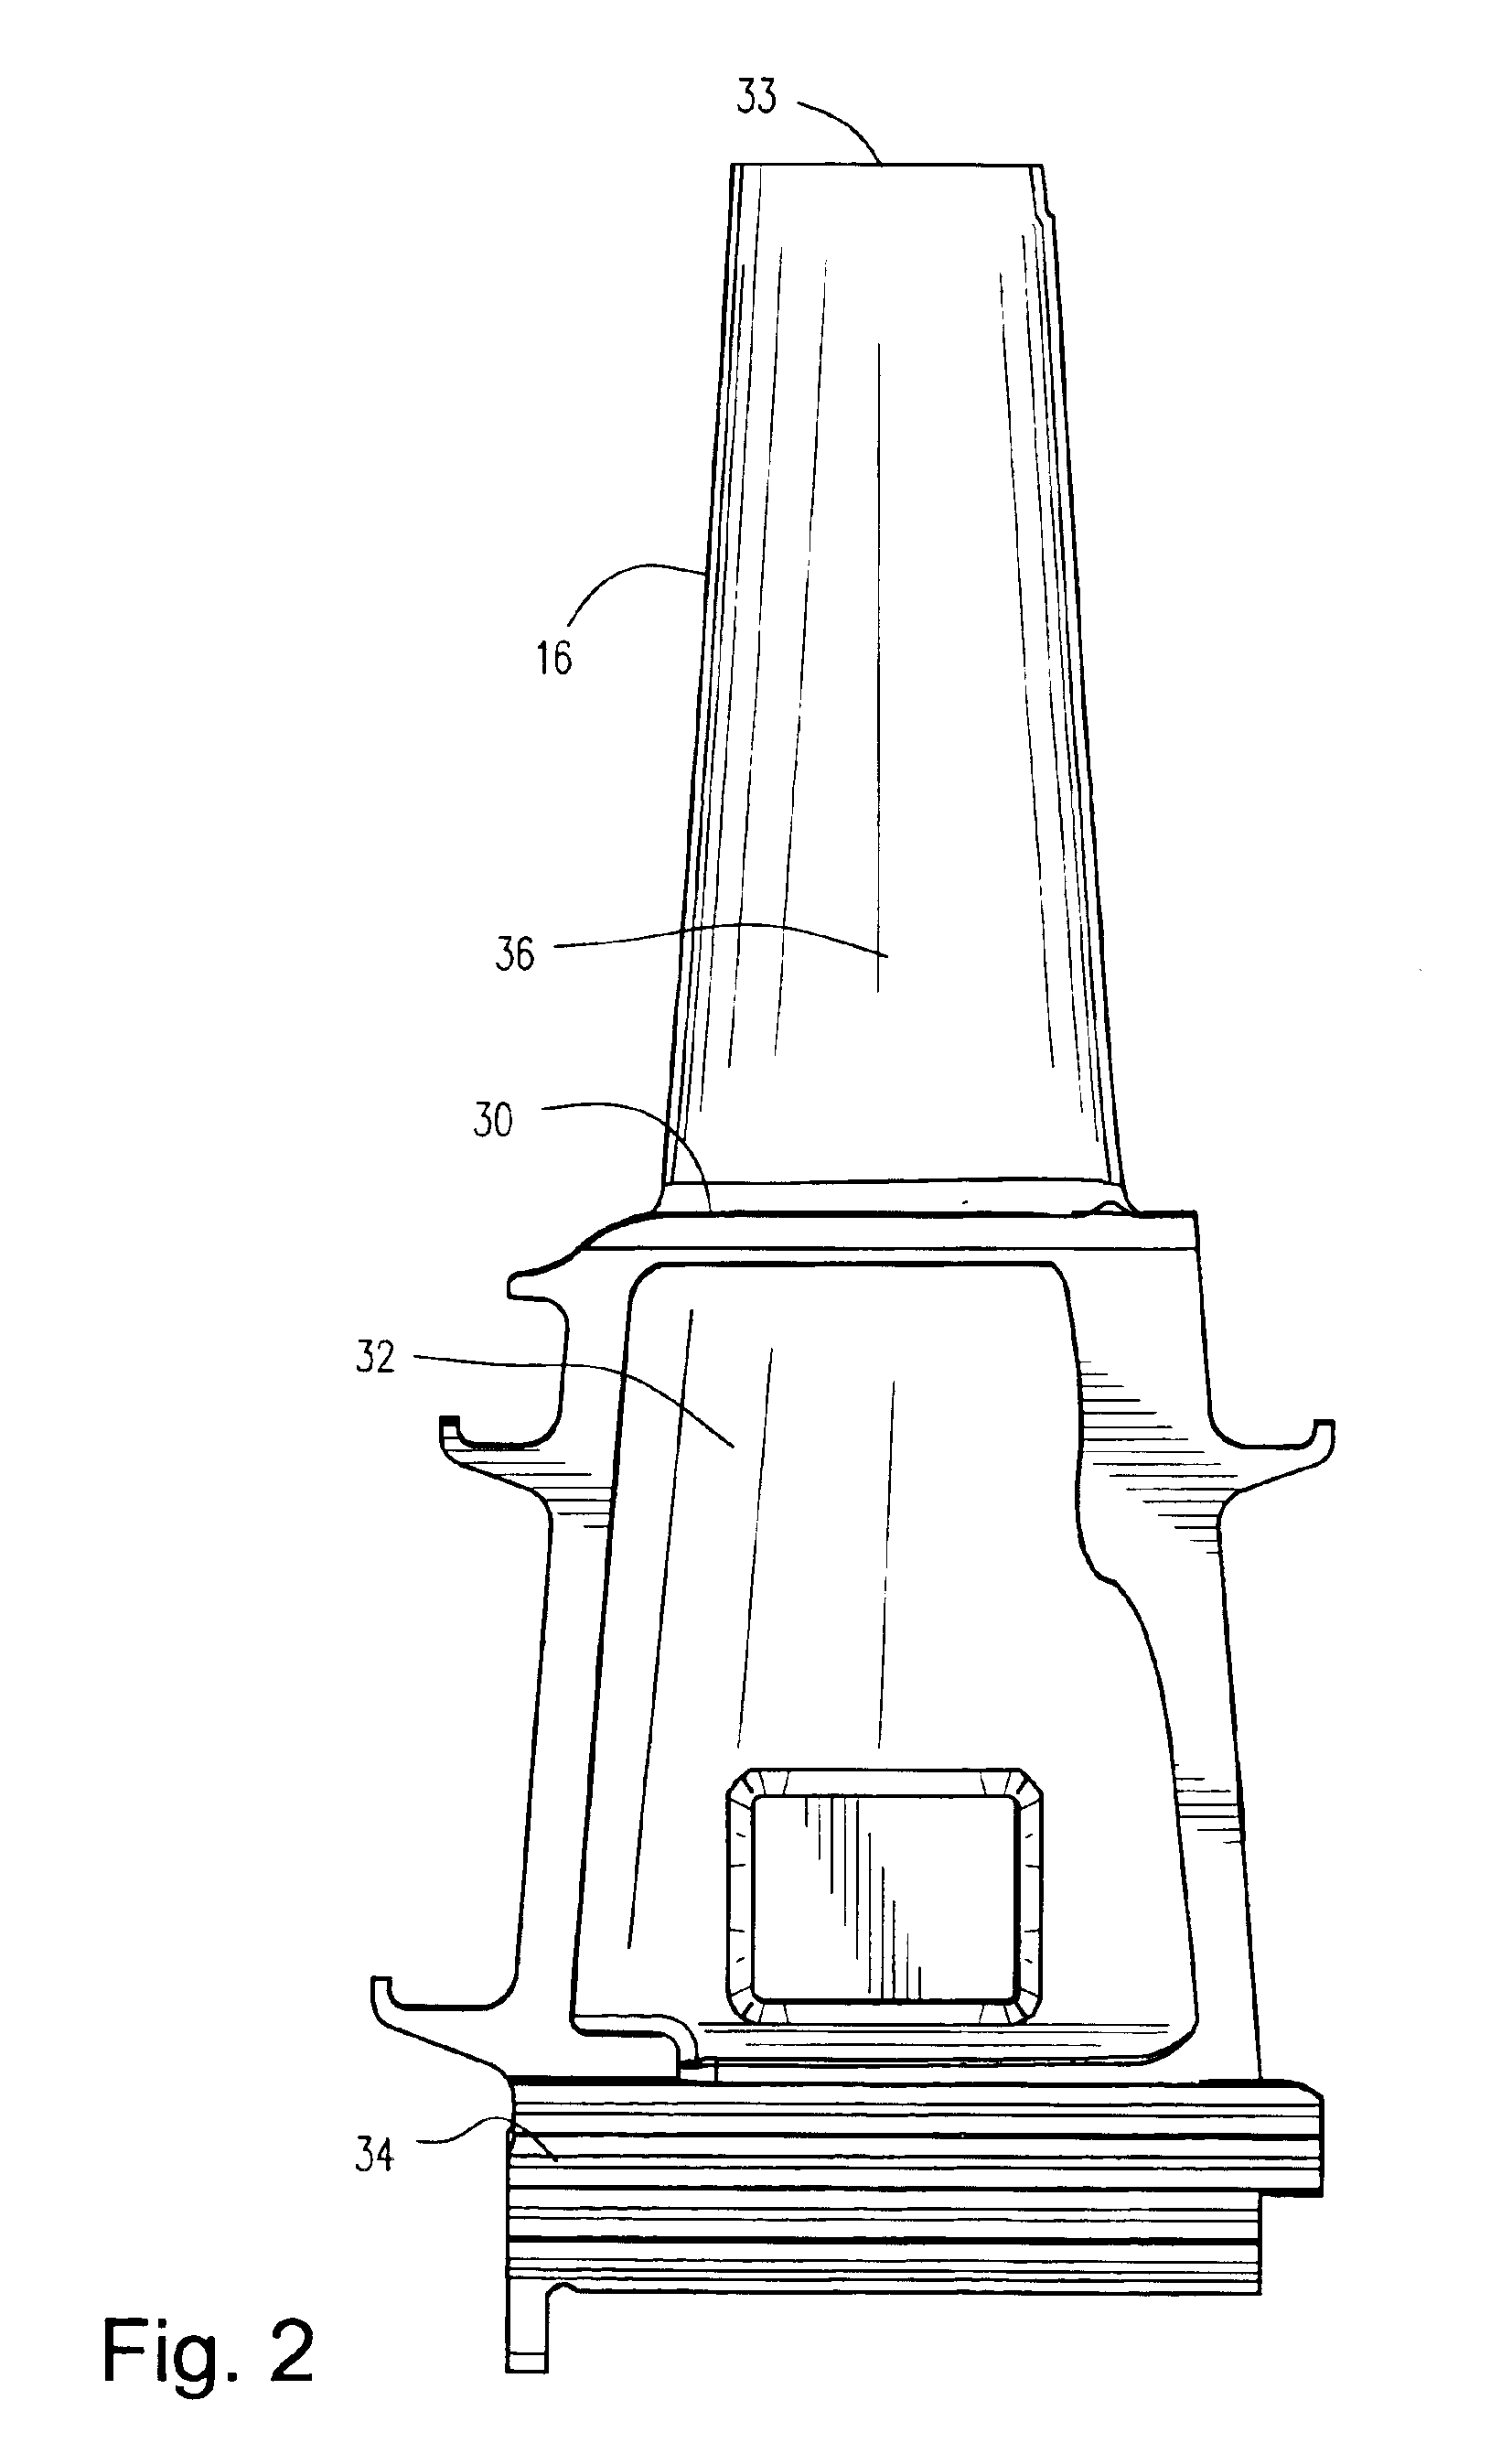 Perimeter-cooled turbine bucket airfoil cooling hole location, style and configuration